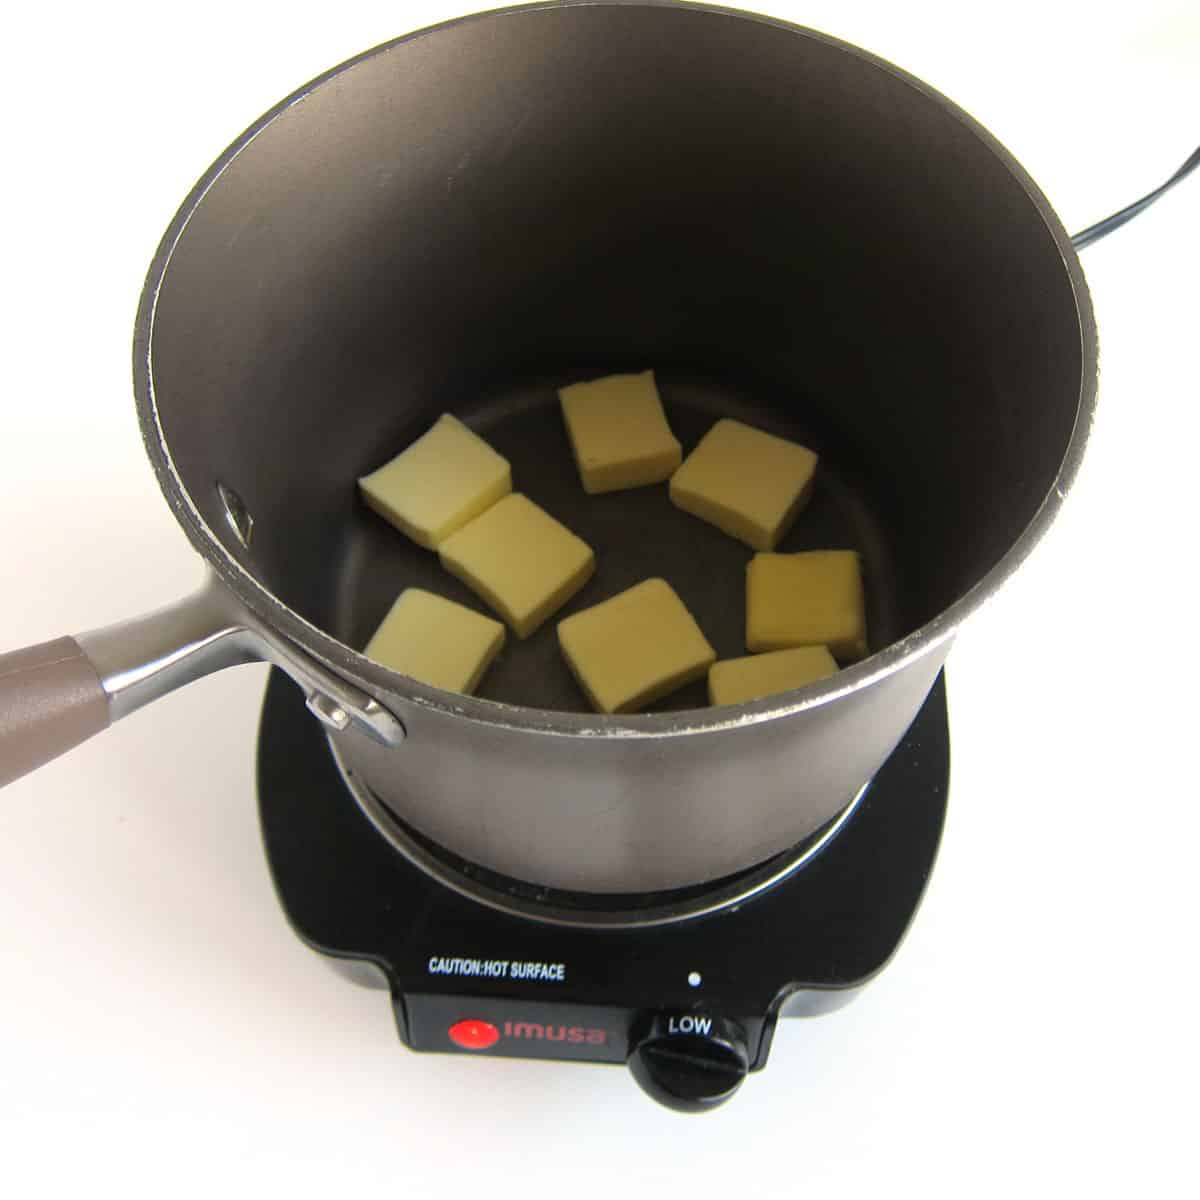 slices of butter in a saucepan set on a small stovetop.